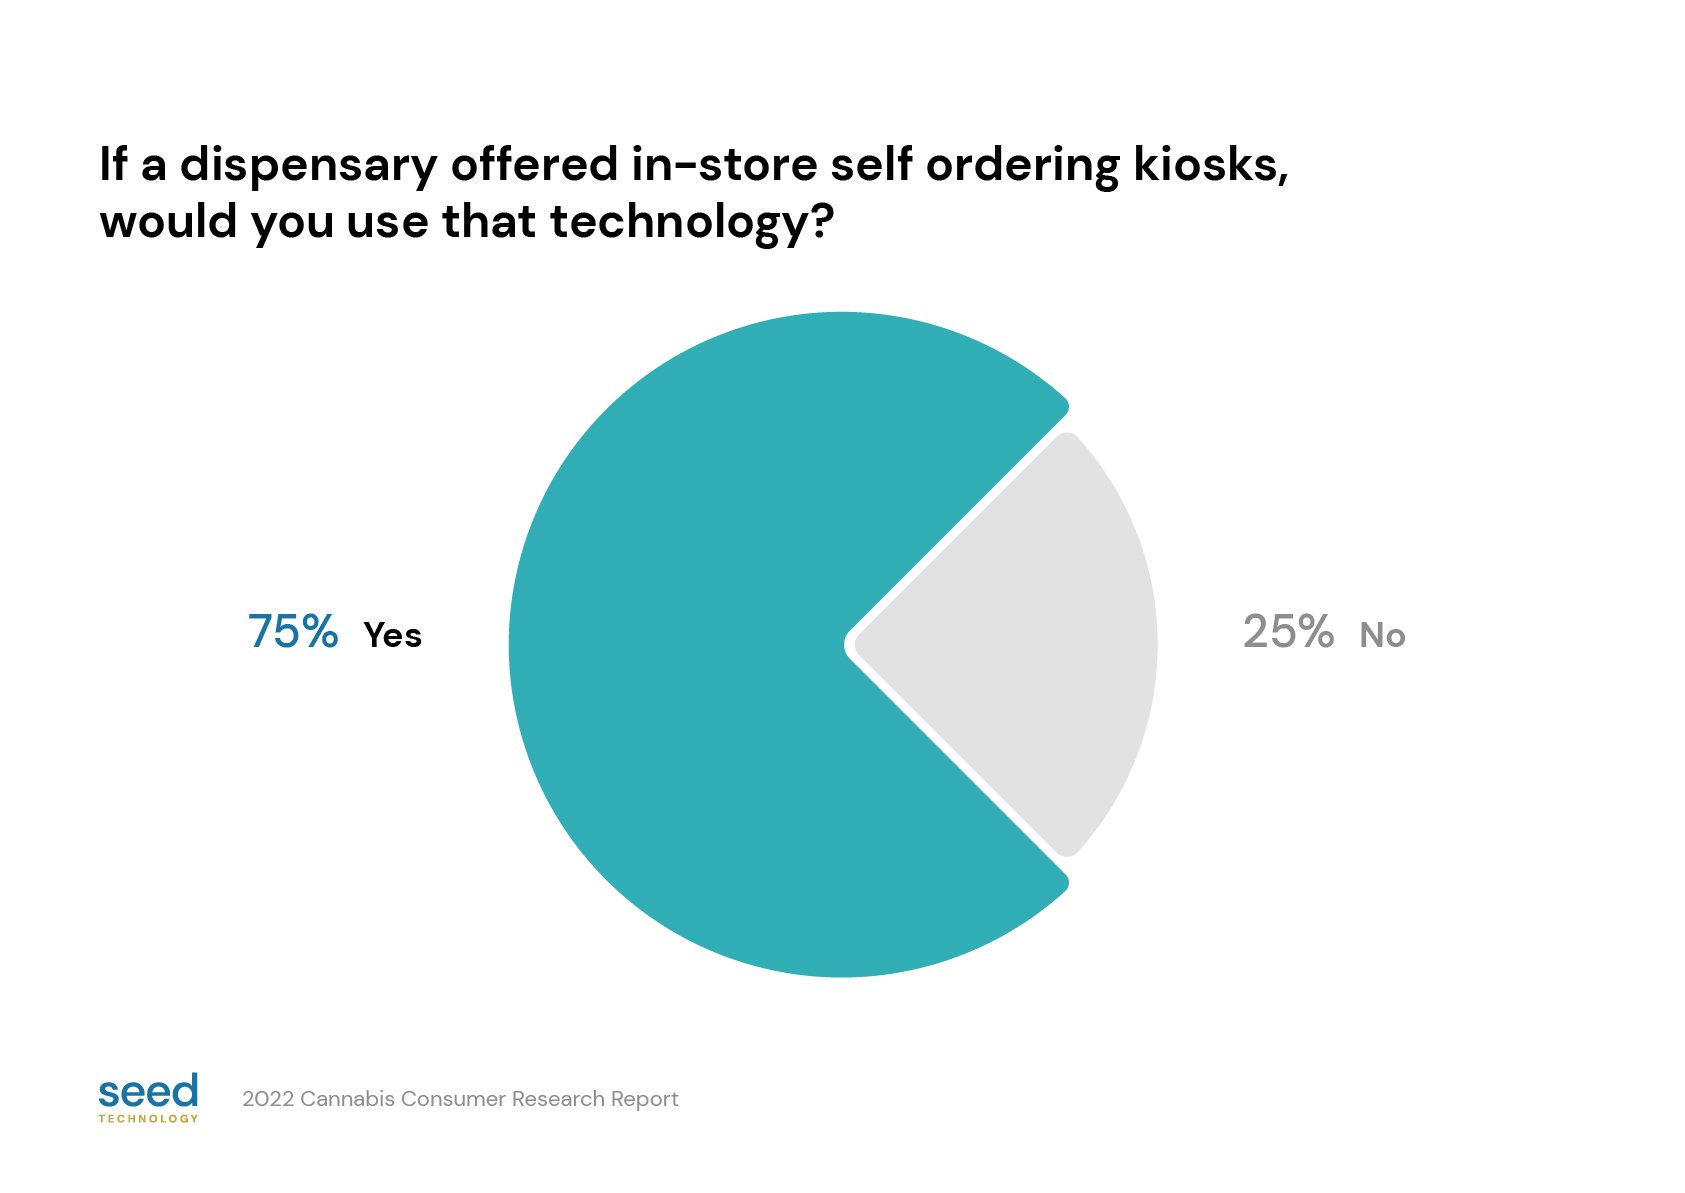 graph - if a dispensary offered in-store kiosks, would you use them? 75% said yes, 25% said no